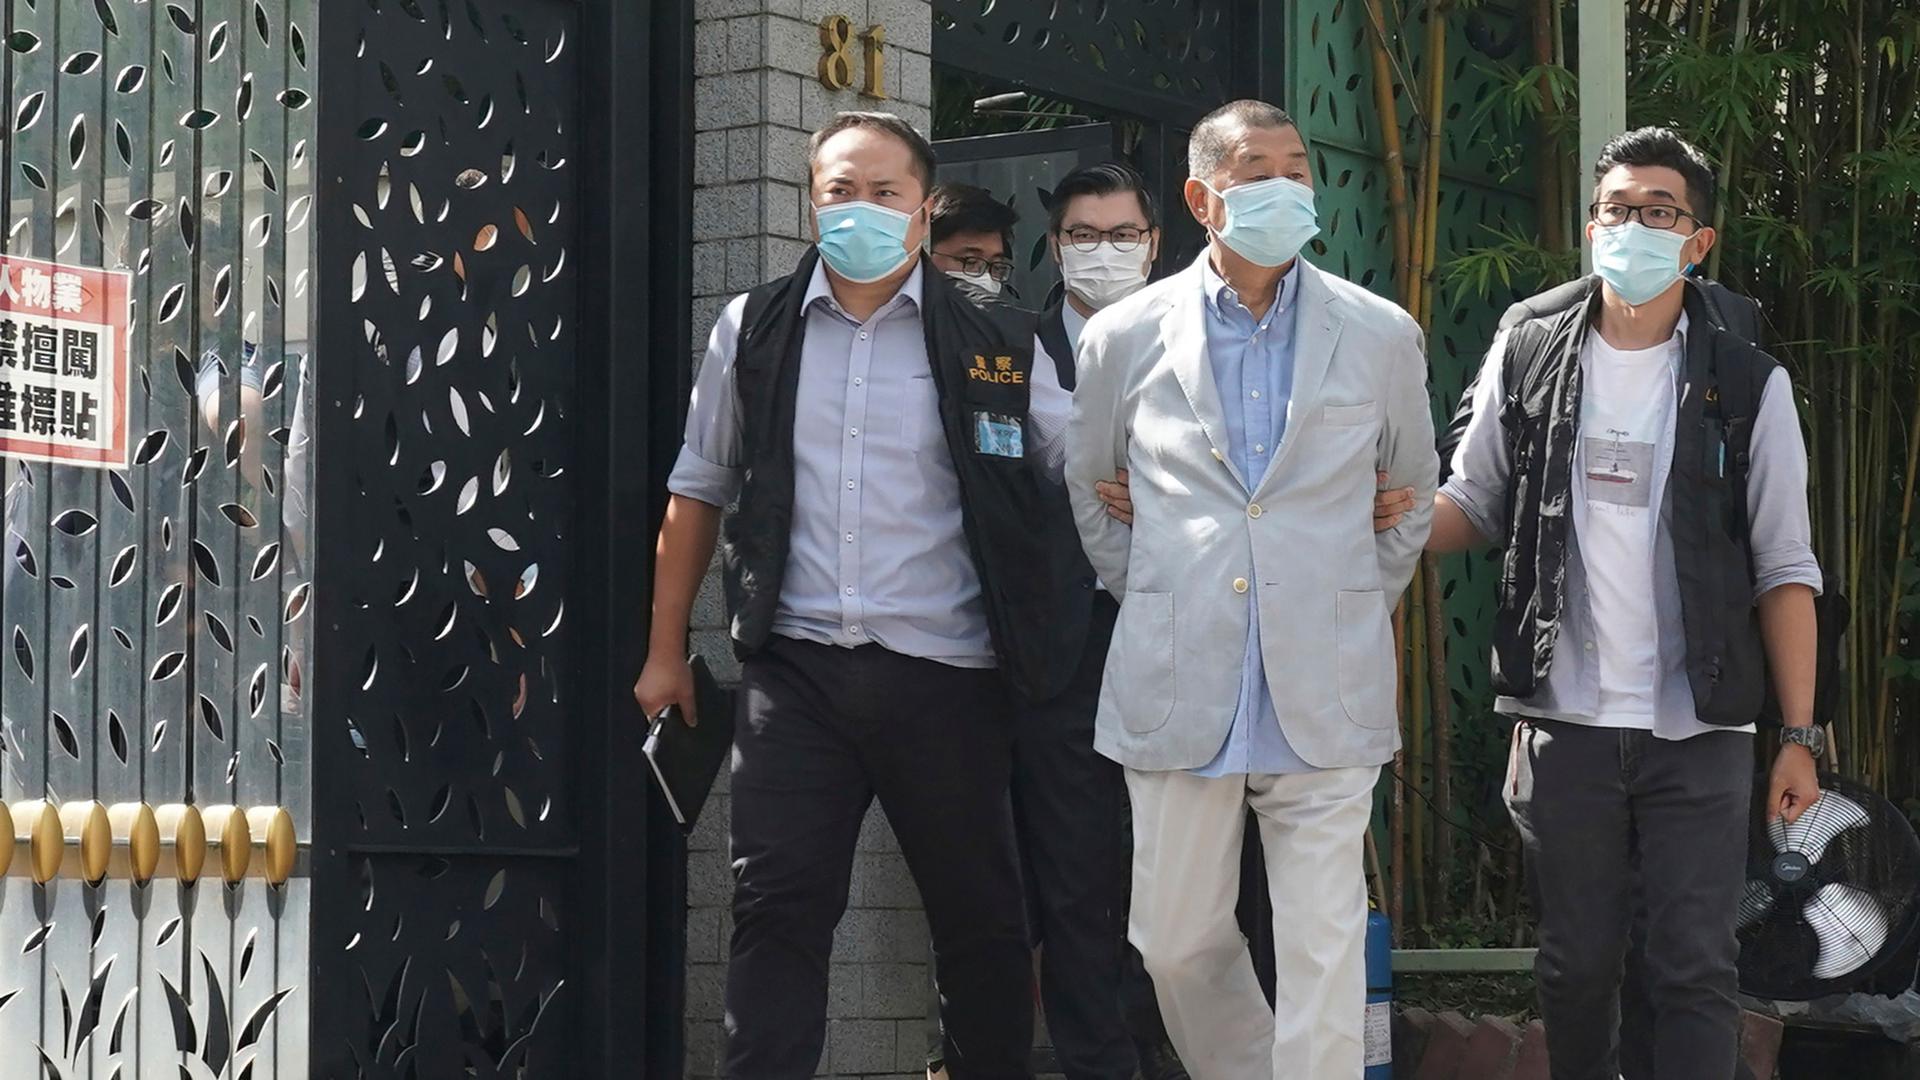 Hong Kong media tycoon Jimmy Lai is shown with his arms tied behind his back and being escorted by four other men all wearing face masks.